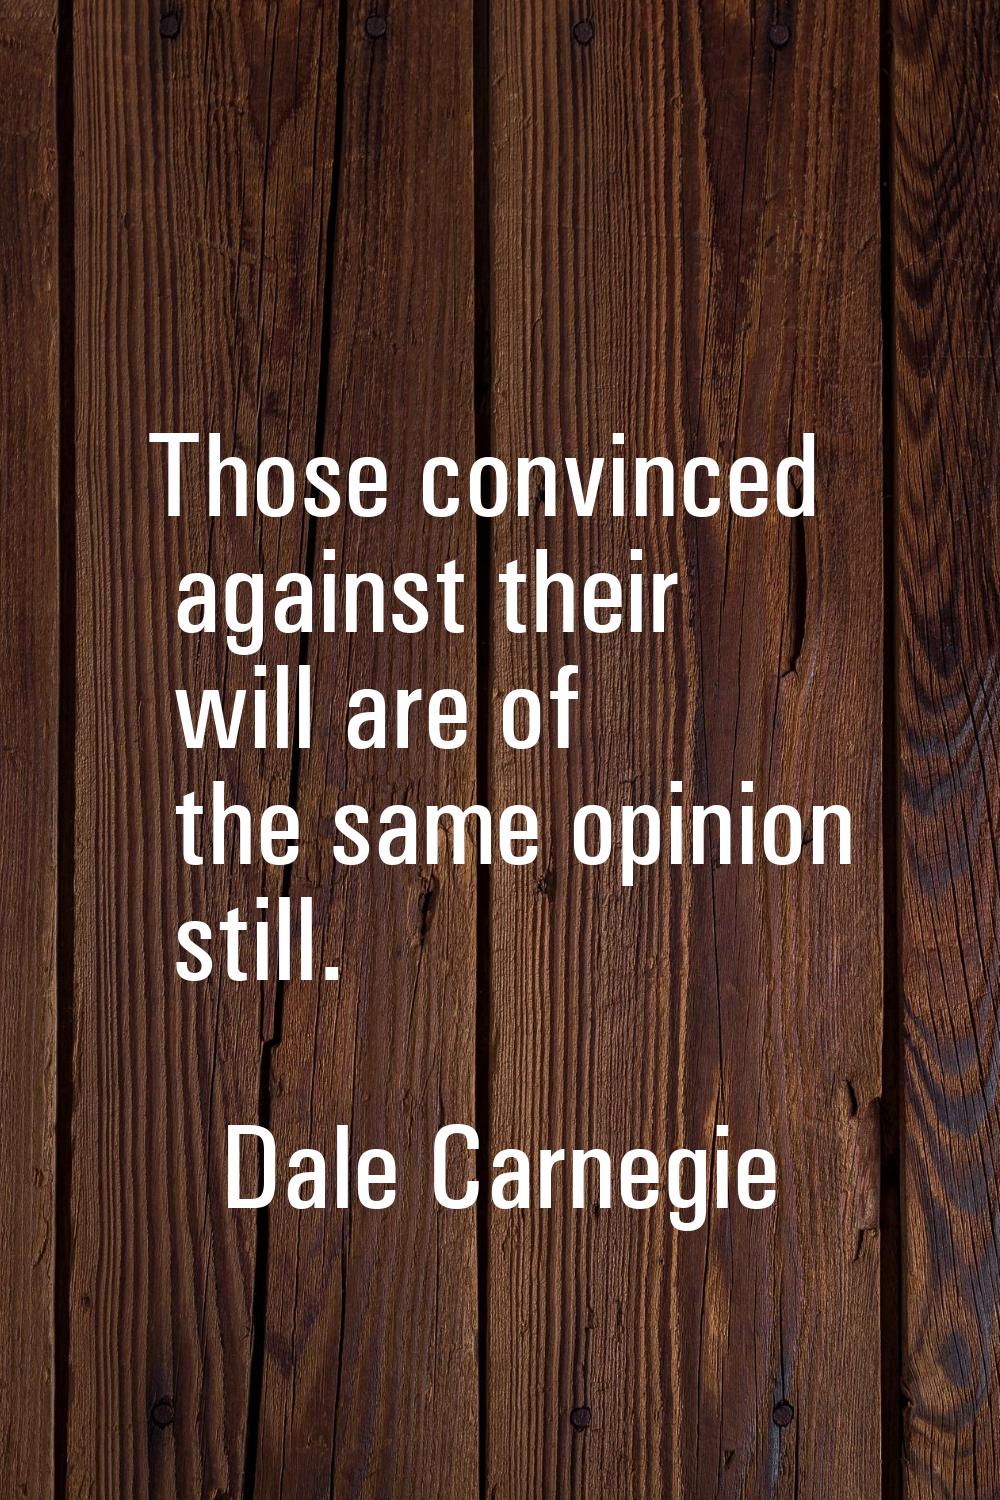 Those convinced against their will are of the same opinion still.